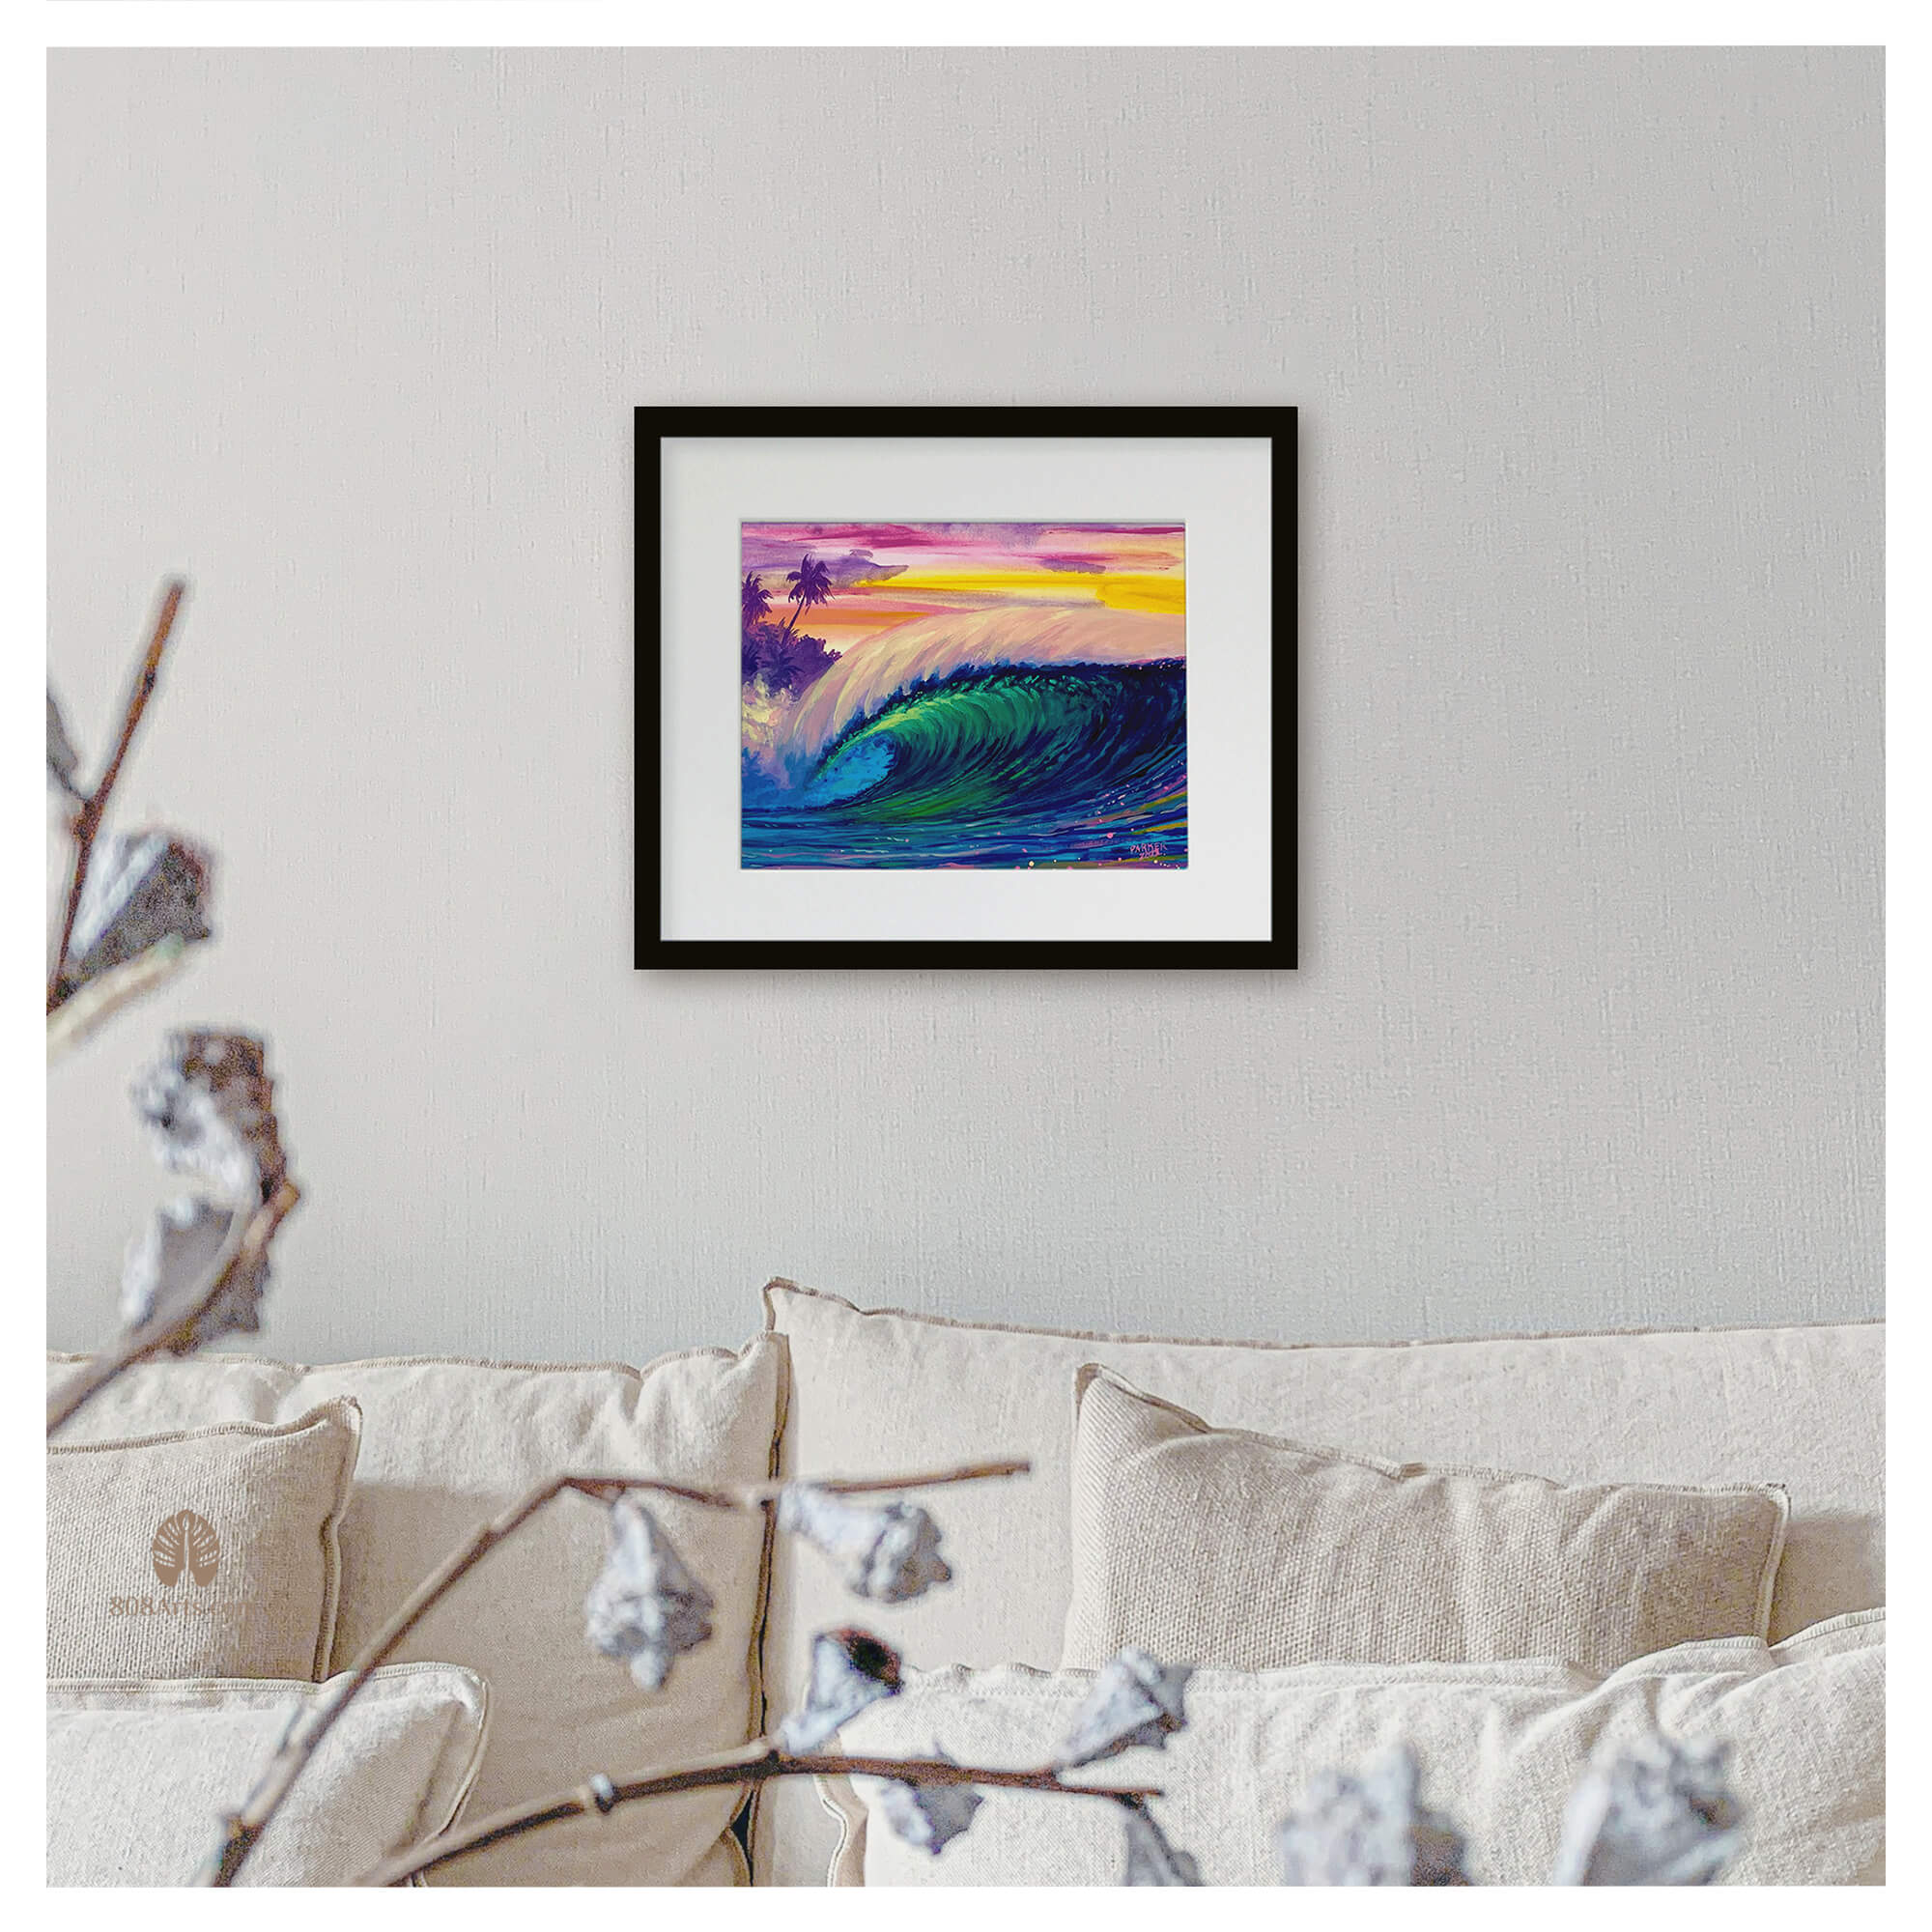 An original painting featuring a large multi-hued crashing wave and vibrant colorful sky by Maui artist Patrick Parker